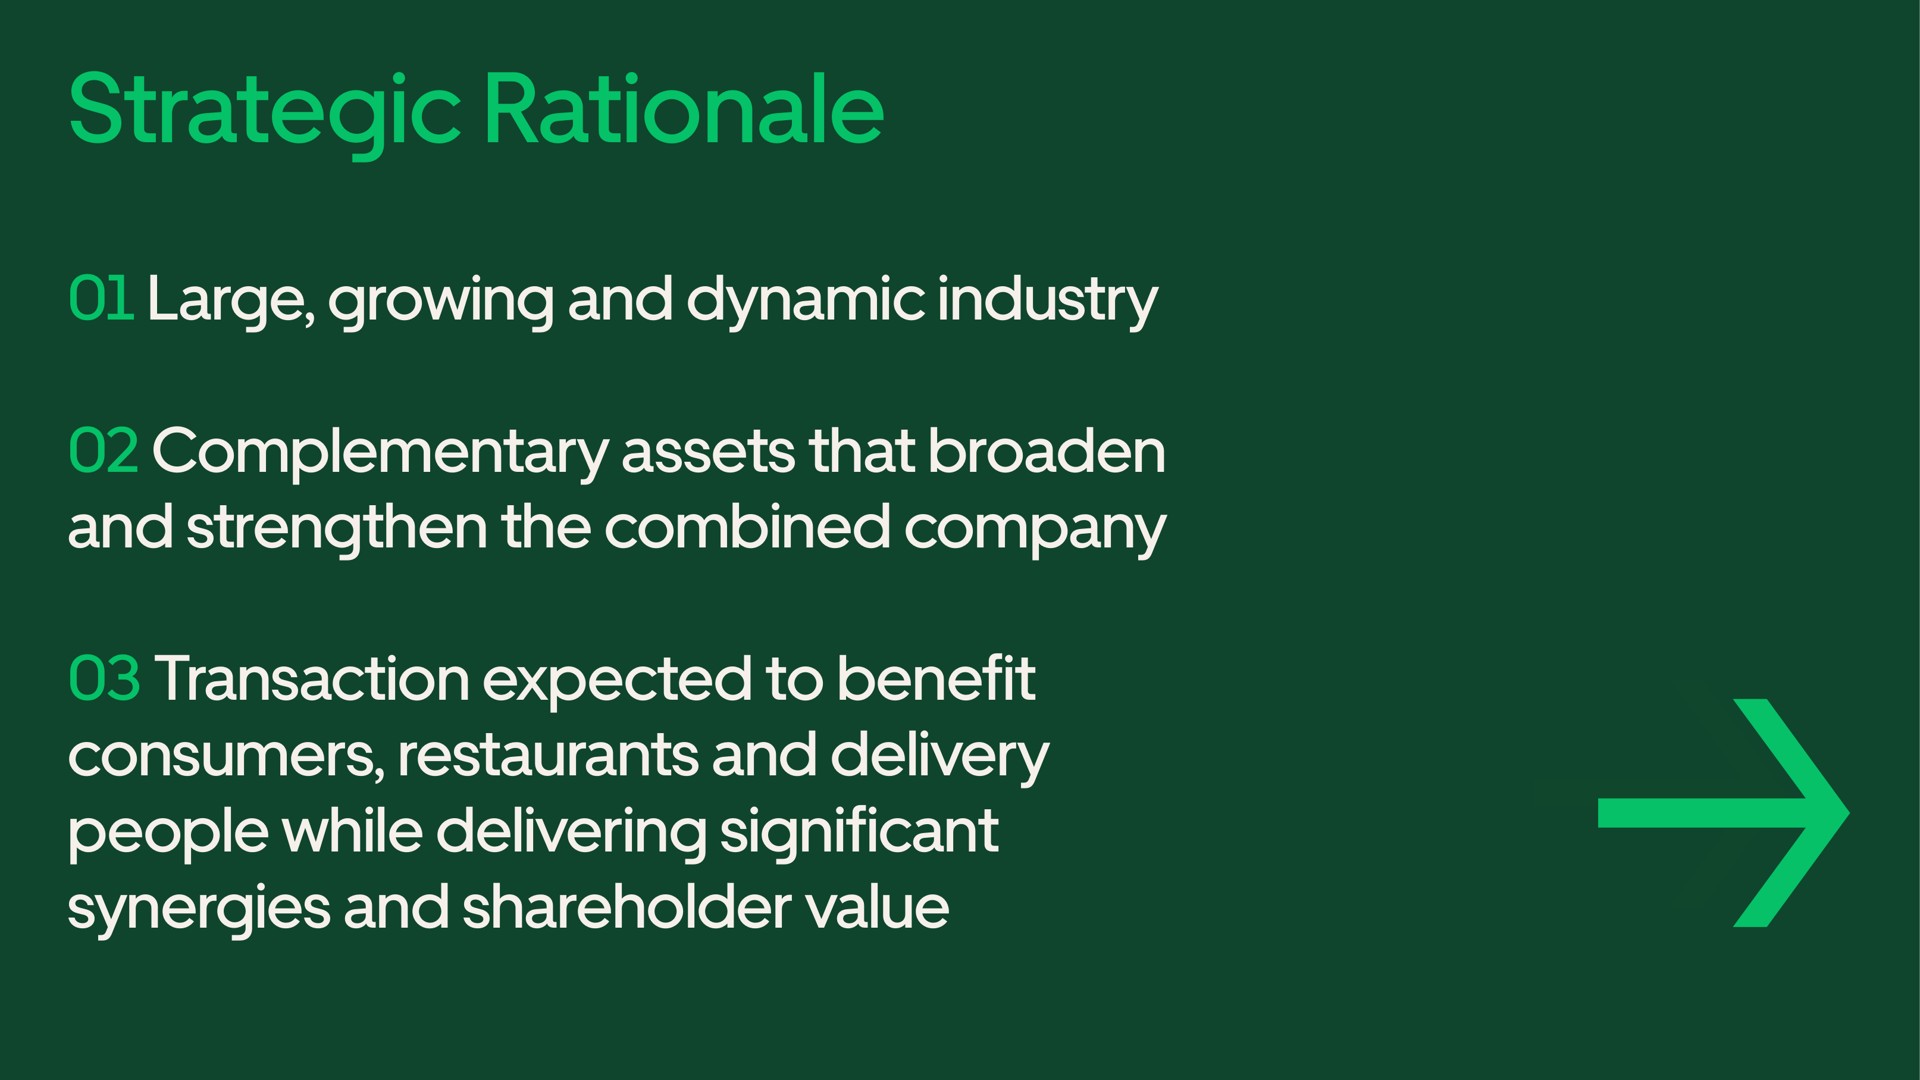 strategic rationale large growing and dynamic industry complementary assets that broaden and strengthen the combined company transaction expected to benefit consumers restaurants and delivery people while delivering significant synergies and shareholder value | Uber